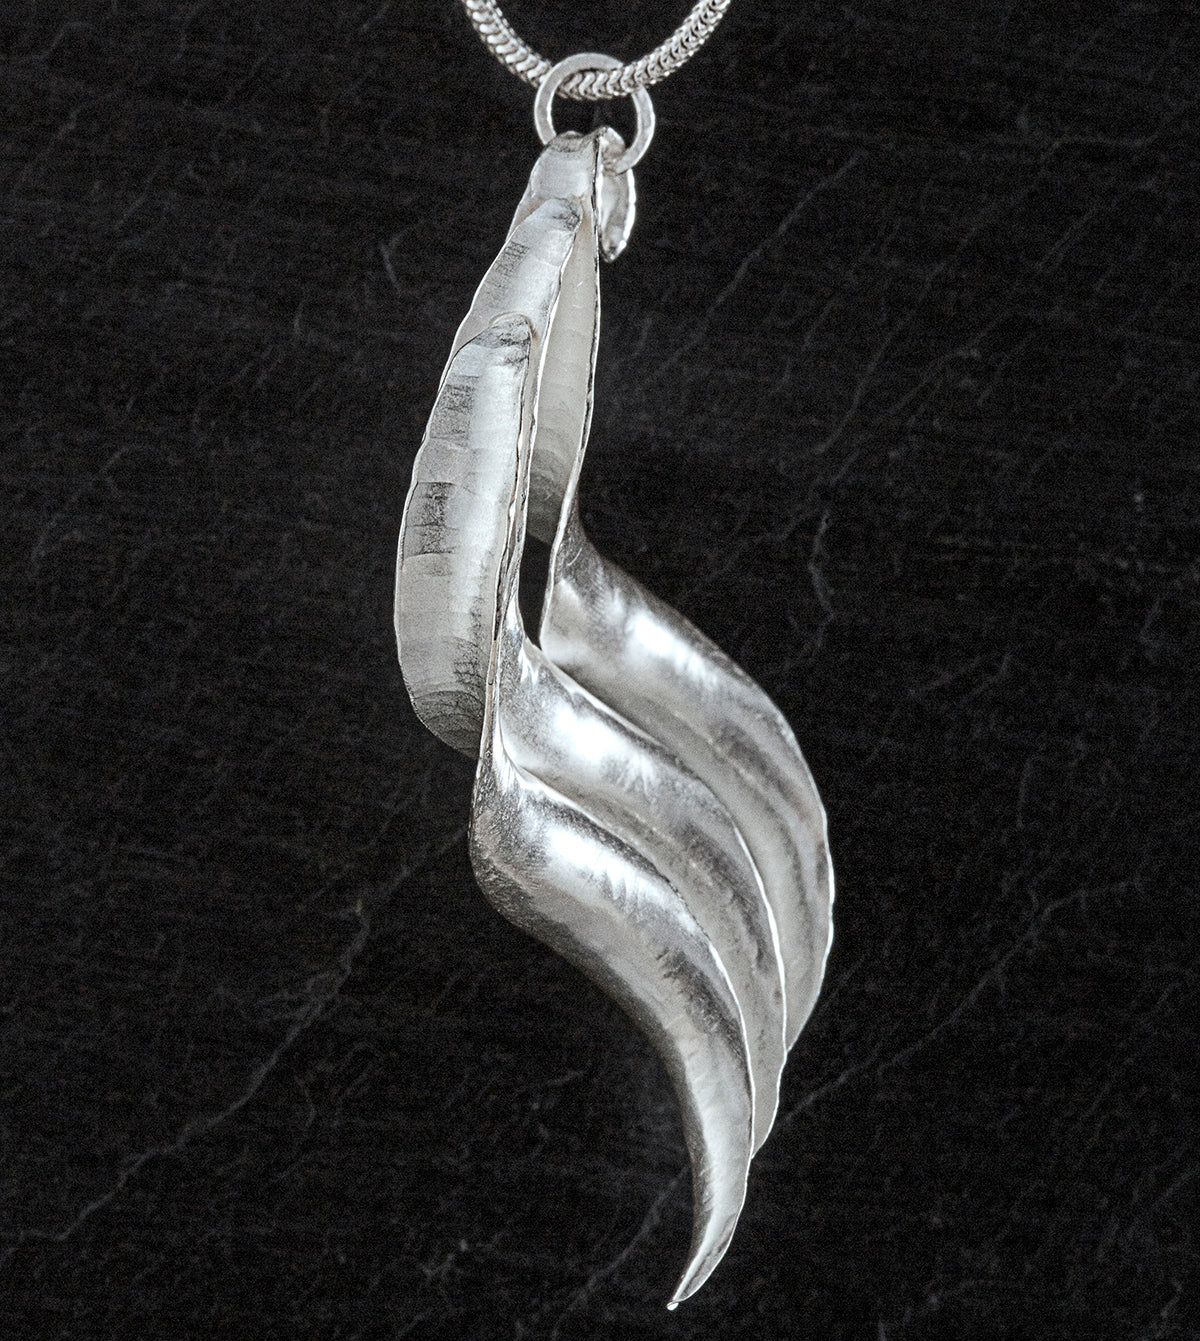 A silver pendant, handmade, composed of three curled and twisted units, the top one ending in a loop for the chain. The three units are arranged so that they form a progression. Shown from the side.